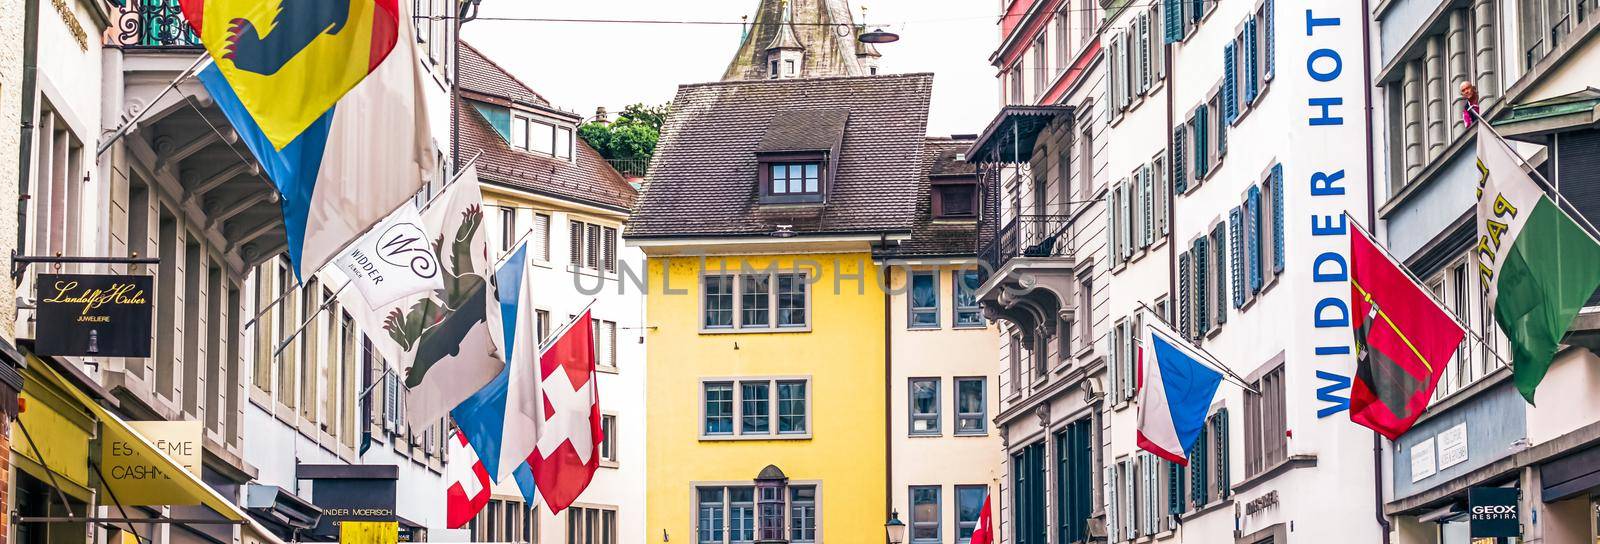 Shopping streets and historic Old Town buildings, shops and luxury stores near main downtown Bahnhofstrasse street, Swiss architecture and travel destination in Zurich, Switzerland by Anneleven